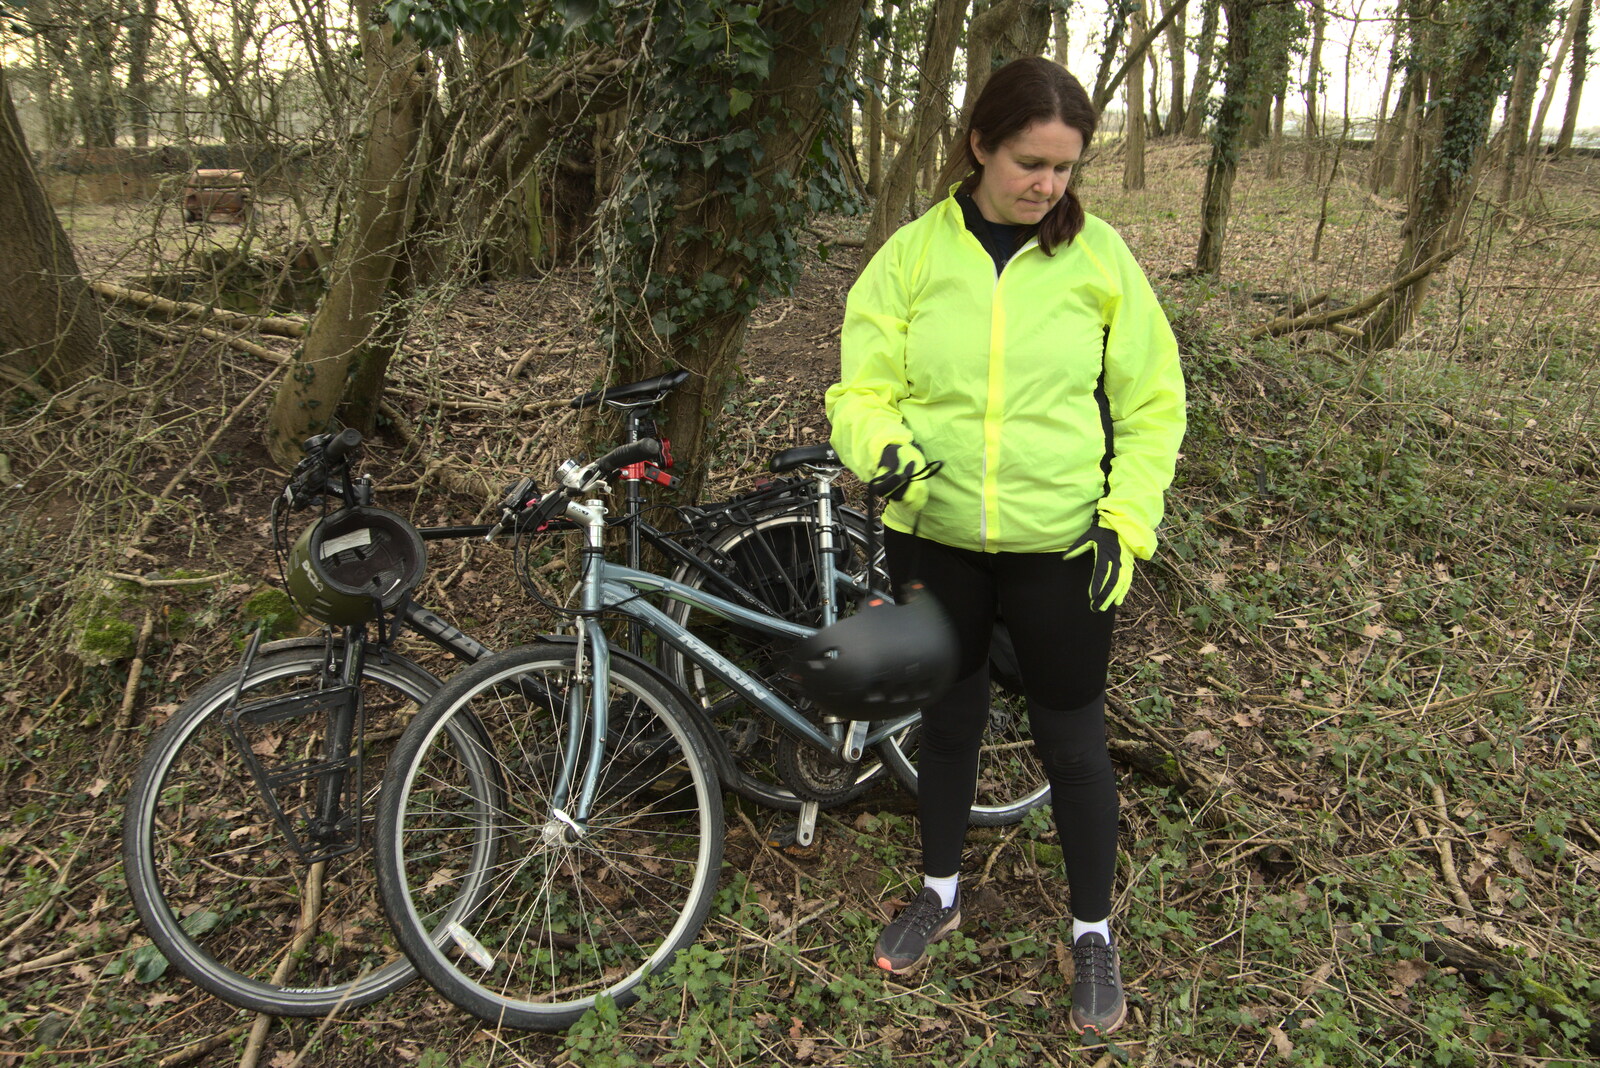 Isobel gets ready to go from Fred's New Bike and an A140 Closure, Brome, Suffolk - 27th February 2021